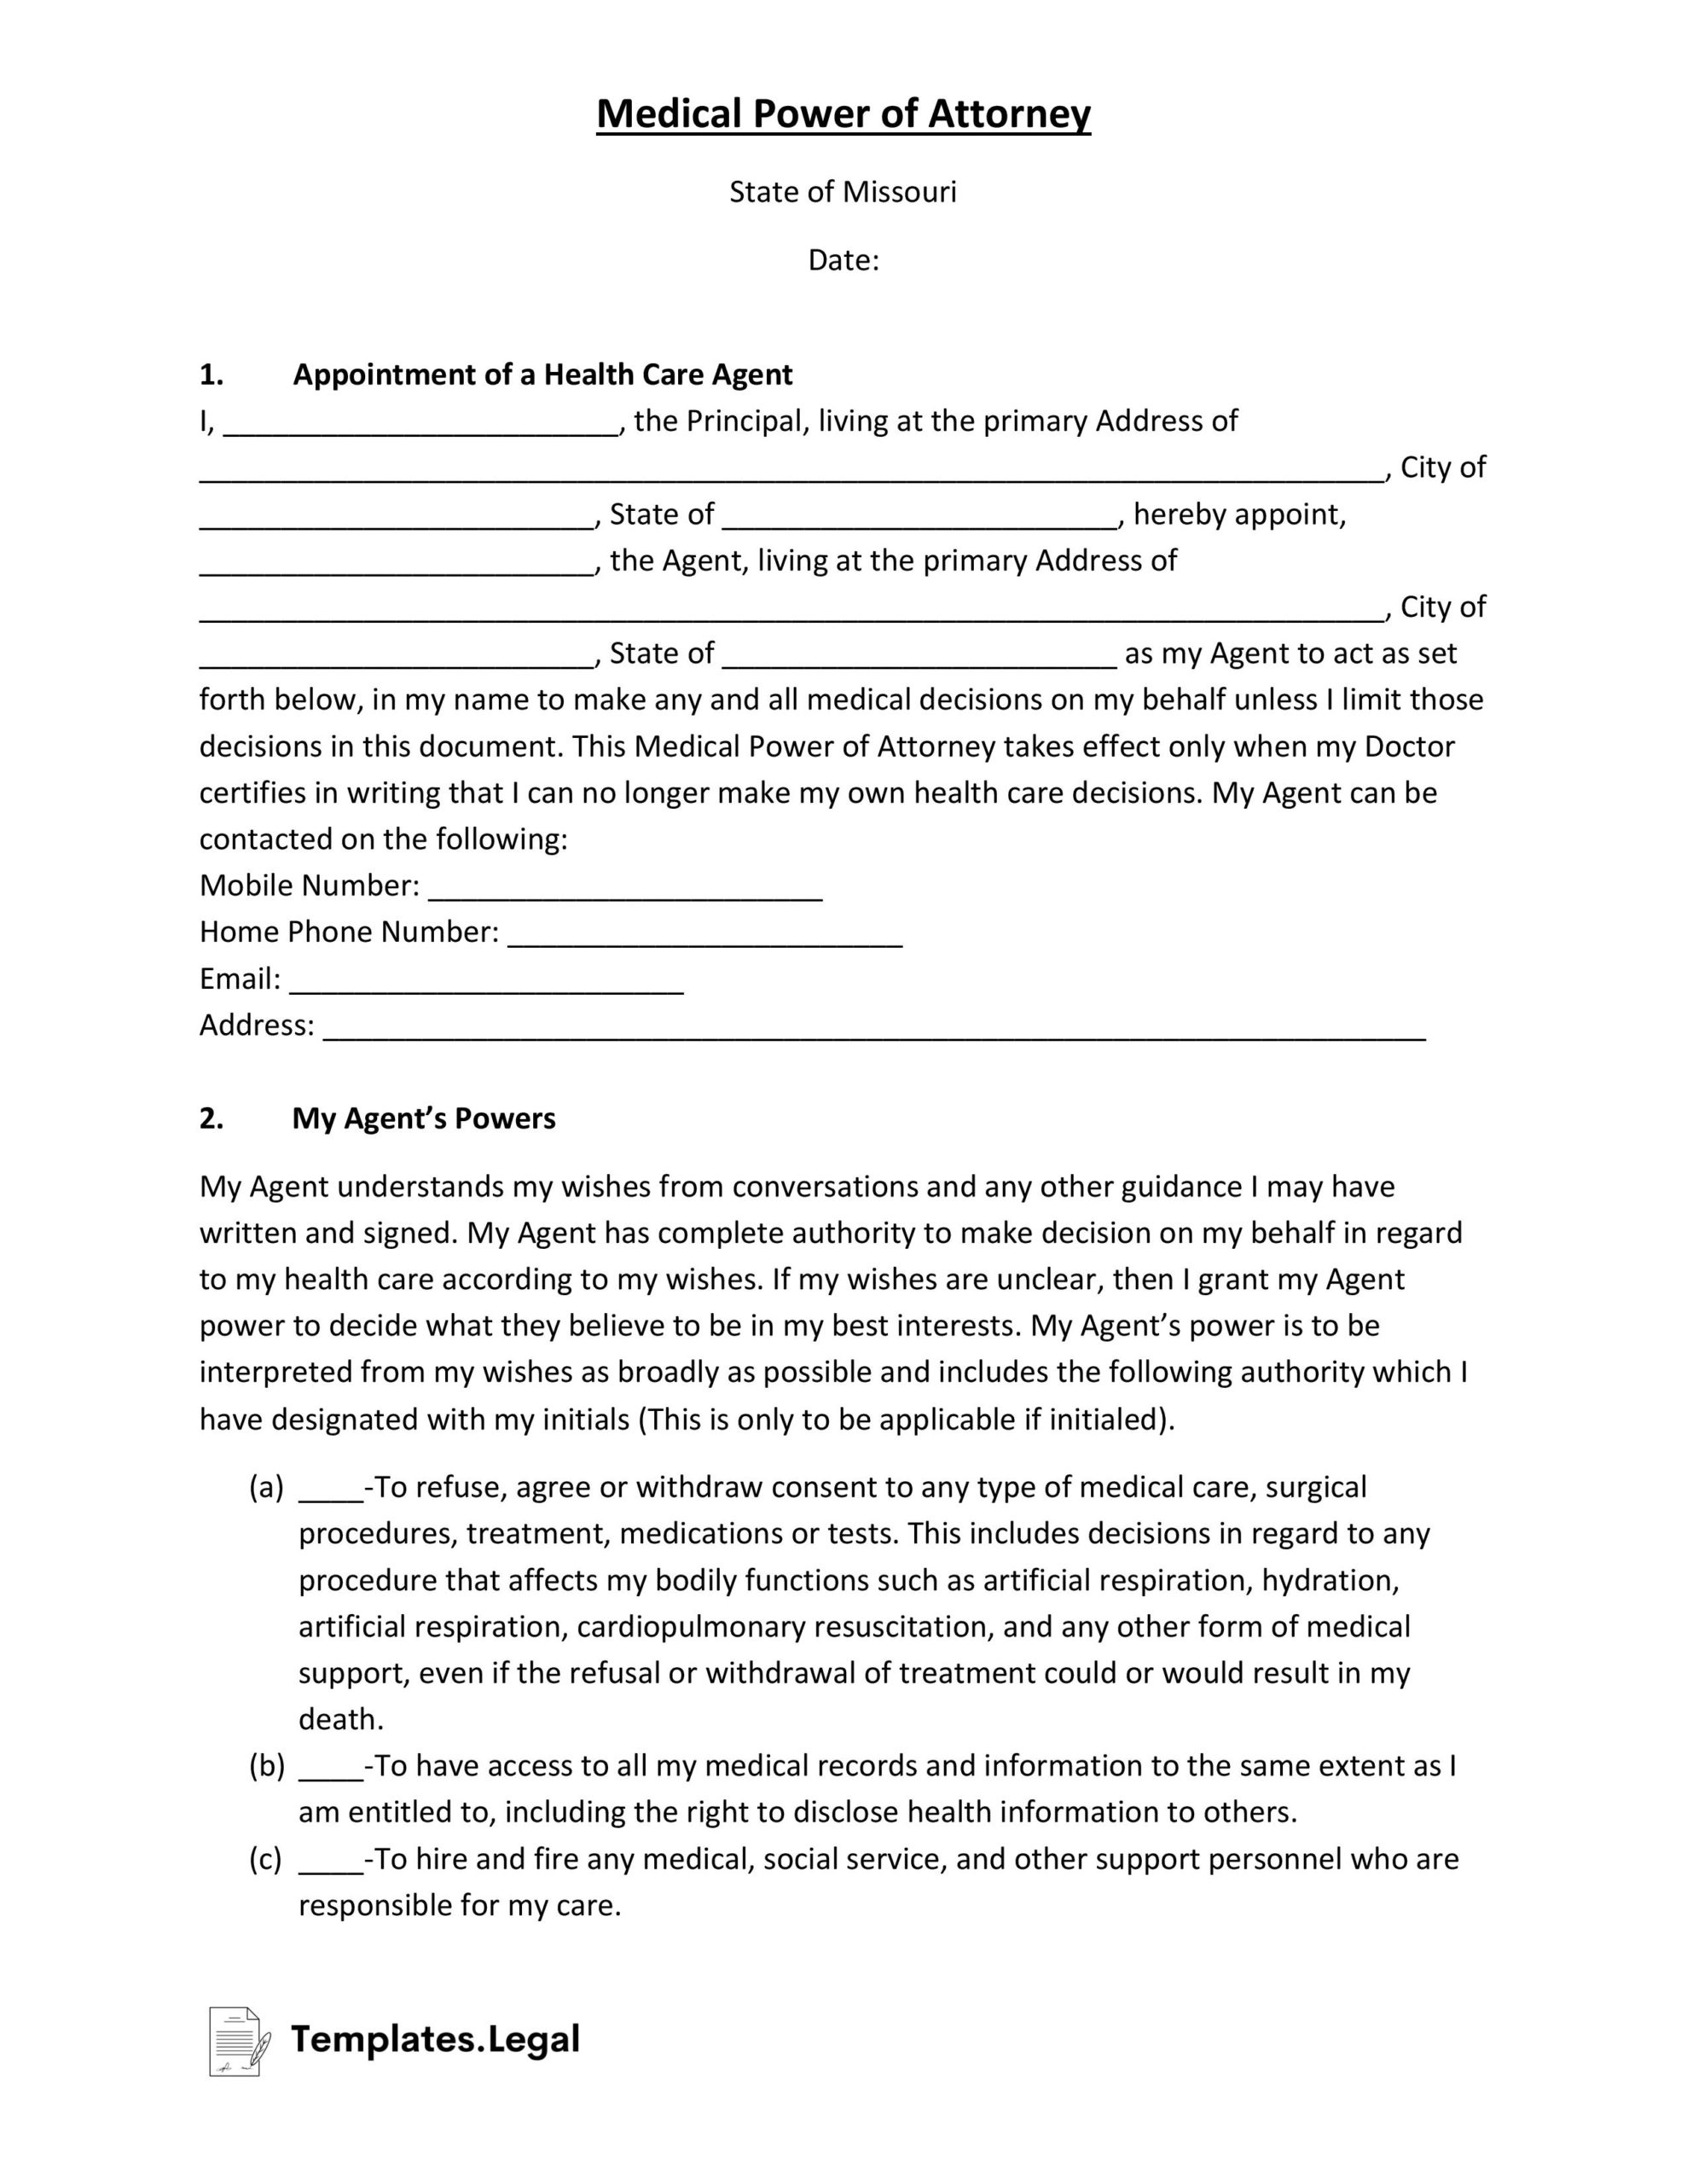 Missouri Medical Power of Attorney- Templates.Legal